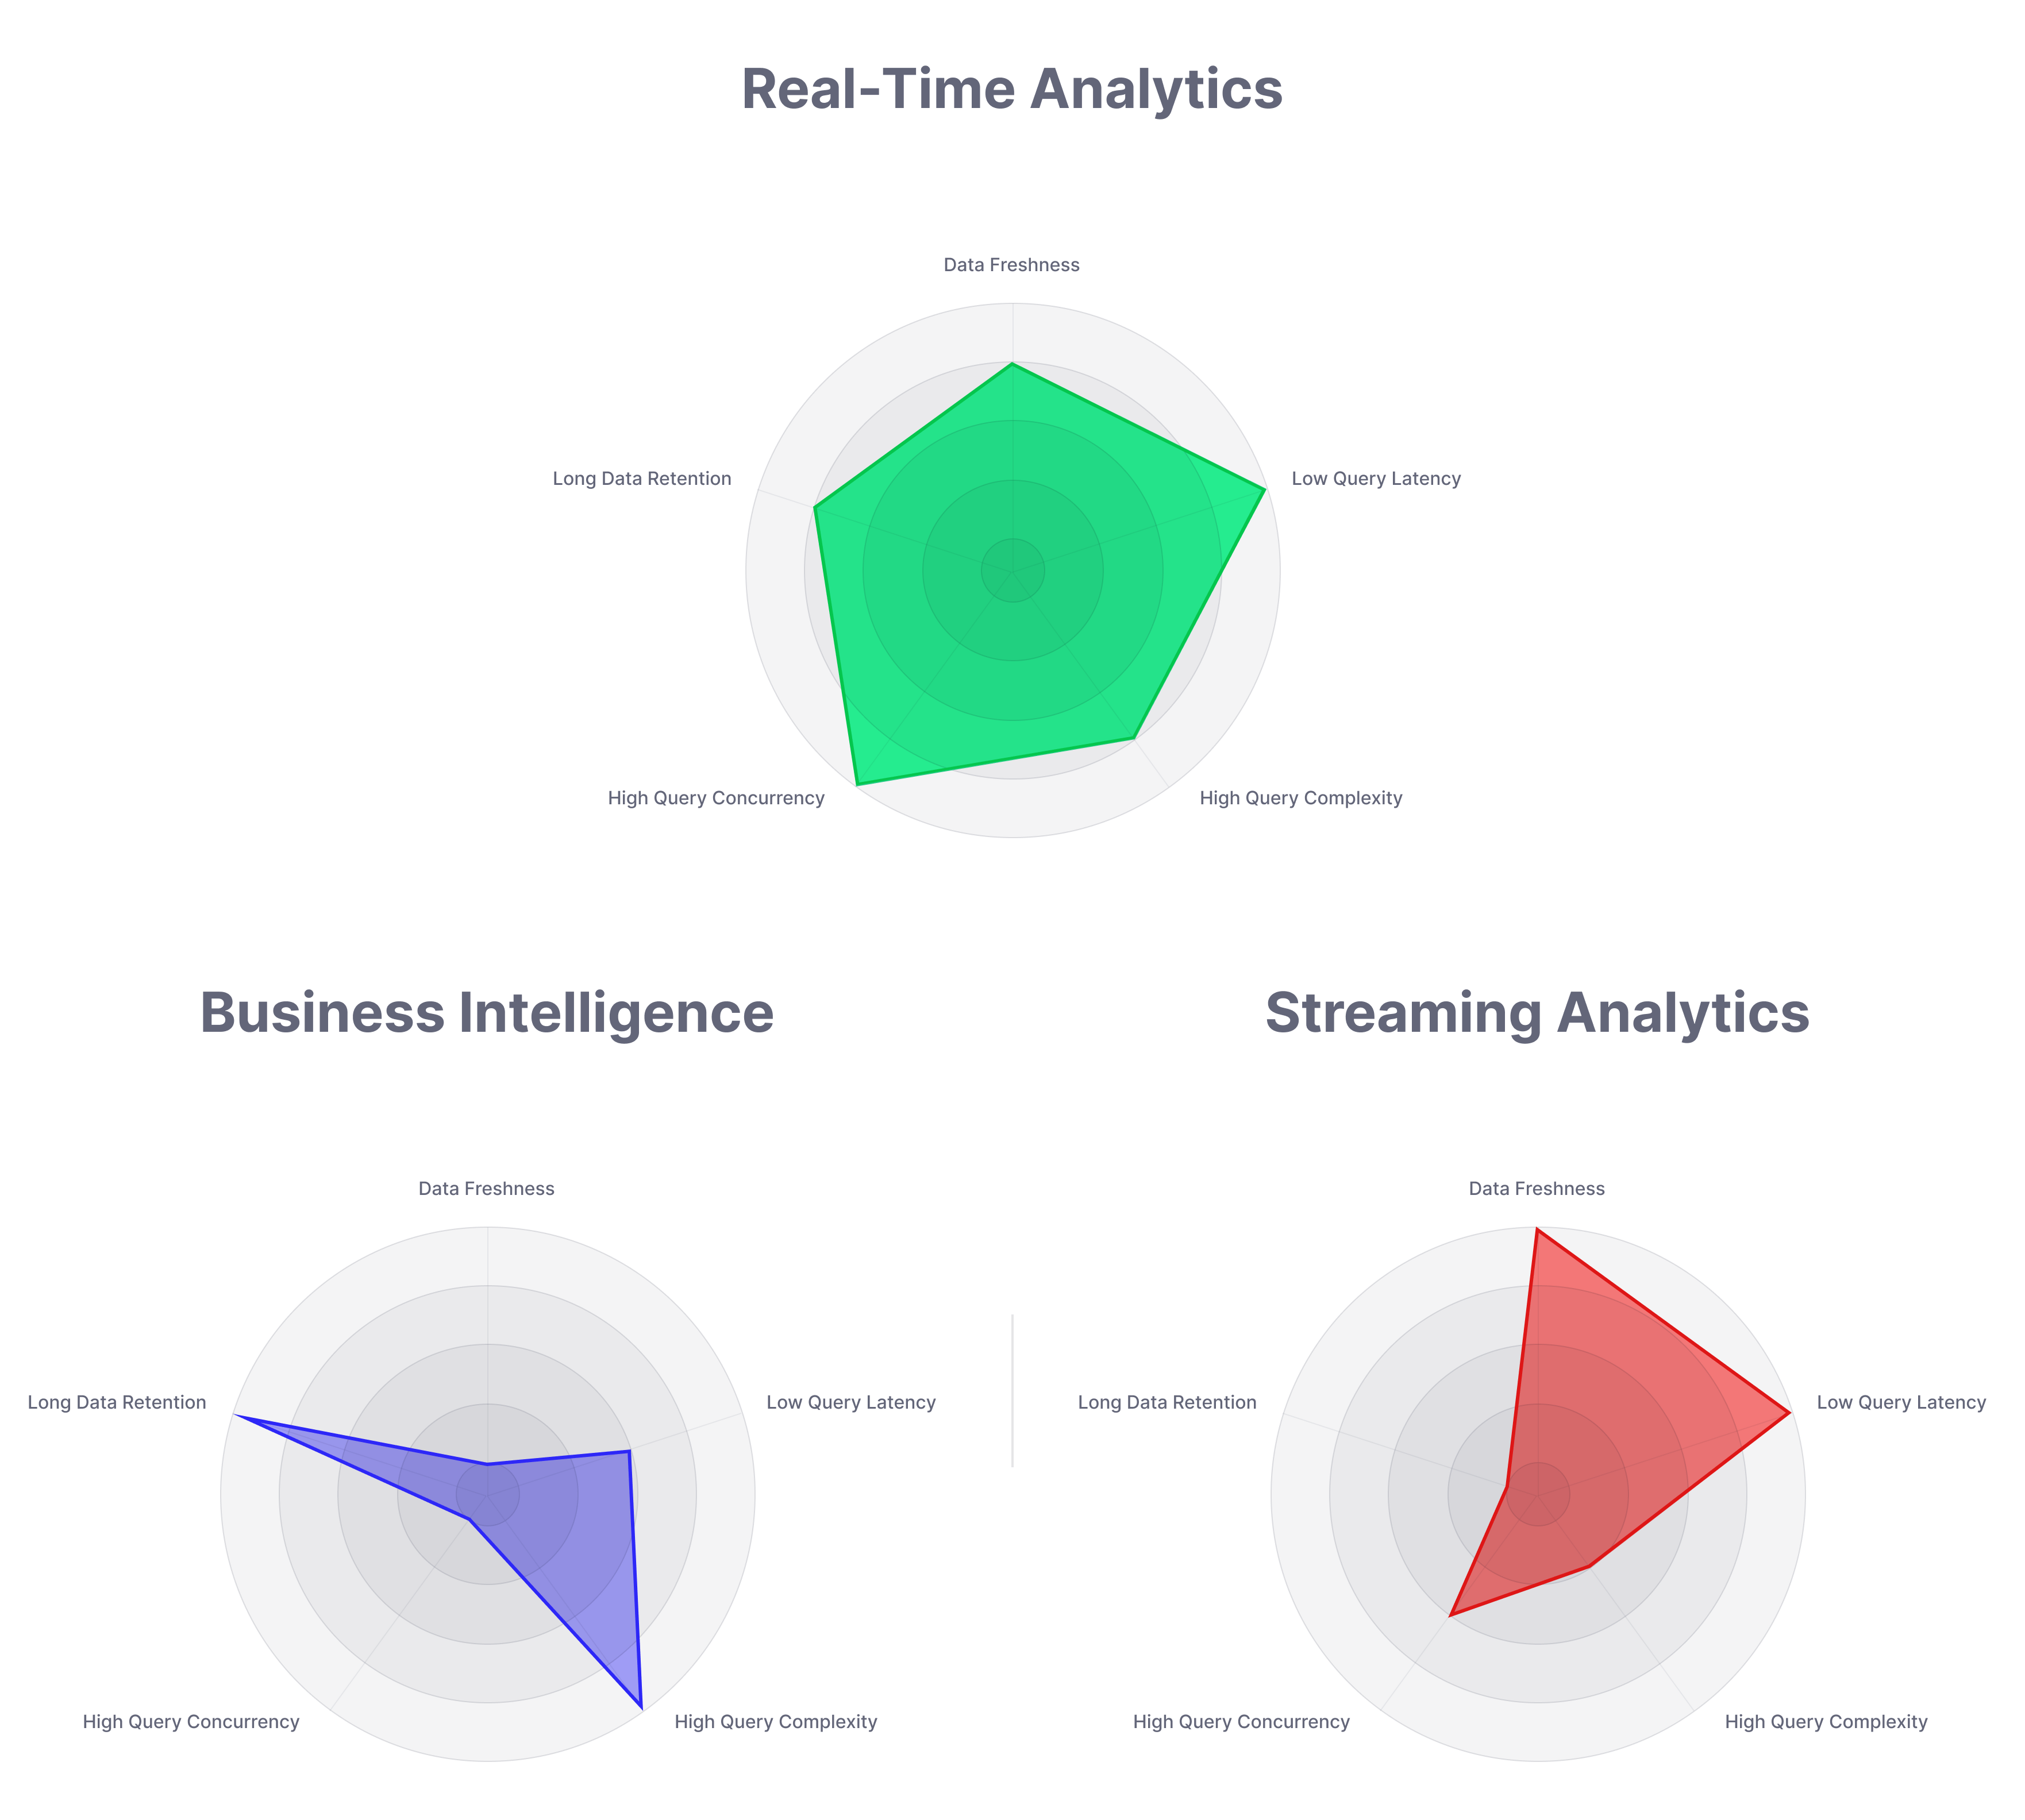 How to Implement Real-time Analytics in Online Games